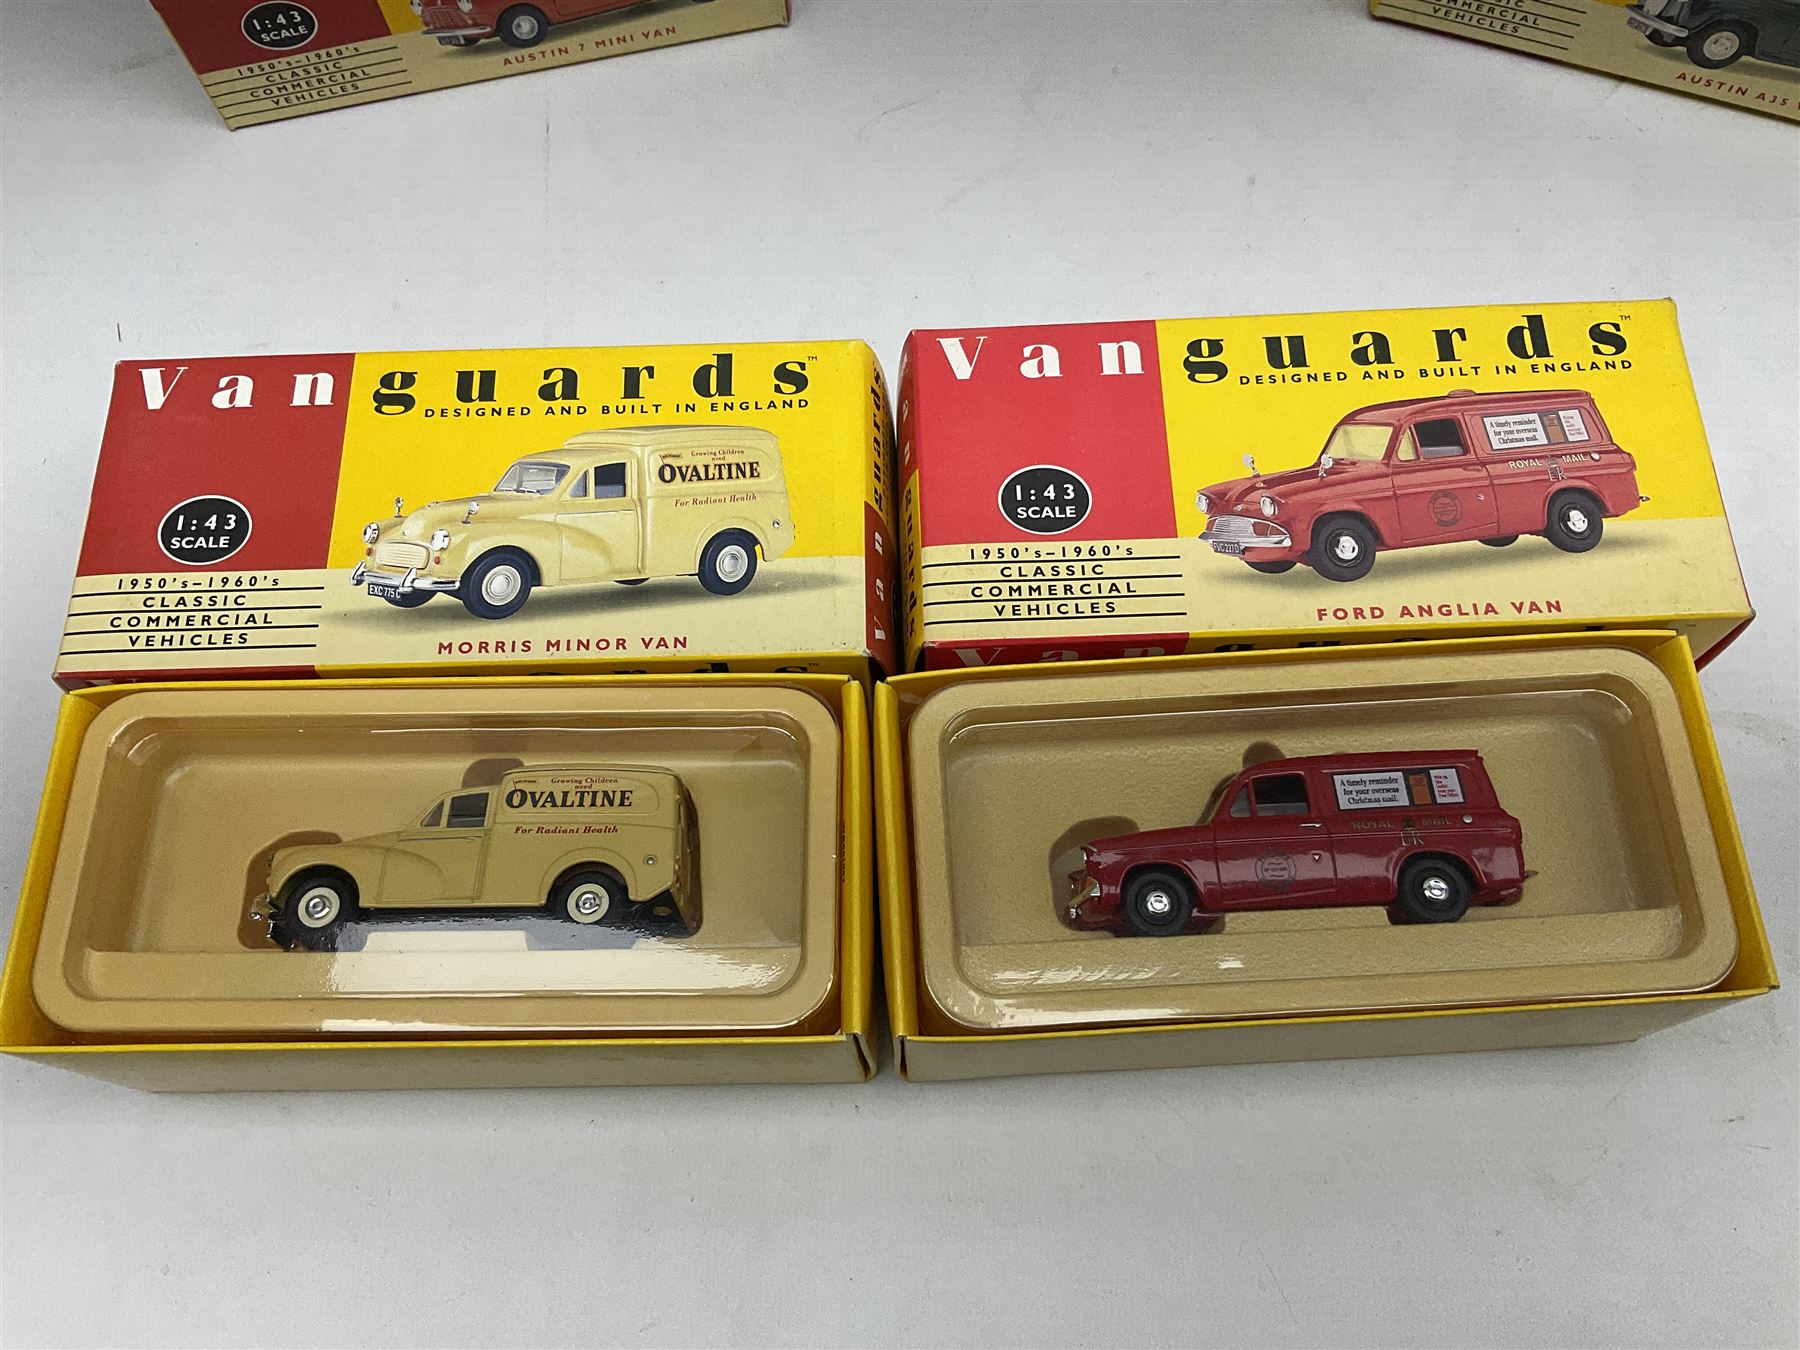 Sixteen Lledo Vanguards 1:43 scale 1950's-1960's Classic Commercial Vehicles die-cast models - Image 3 of 8